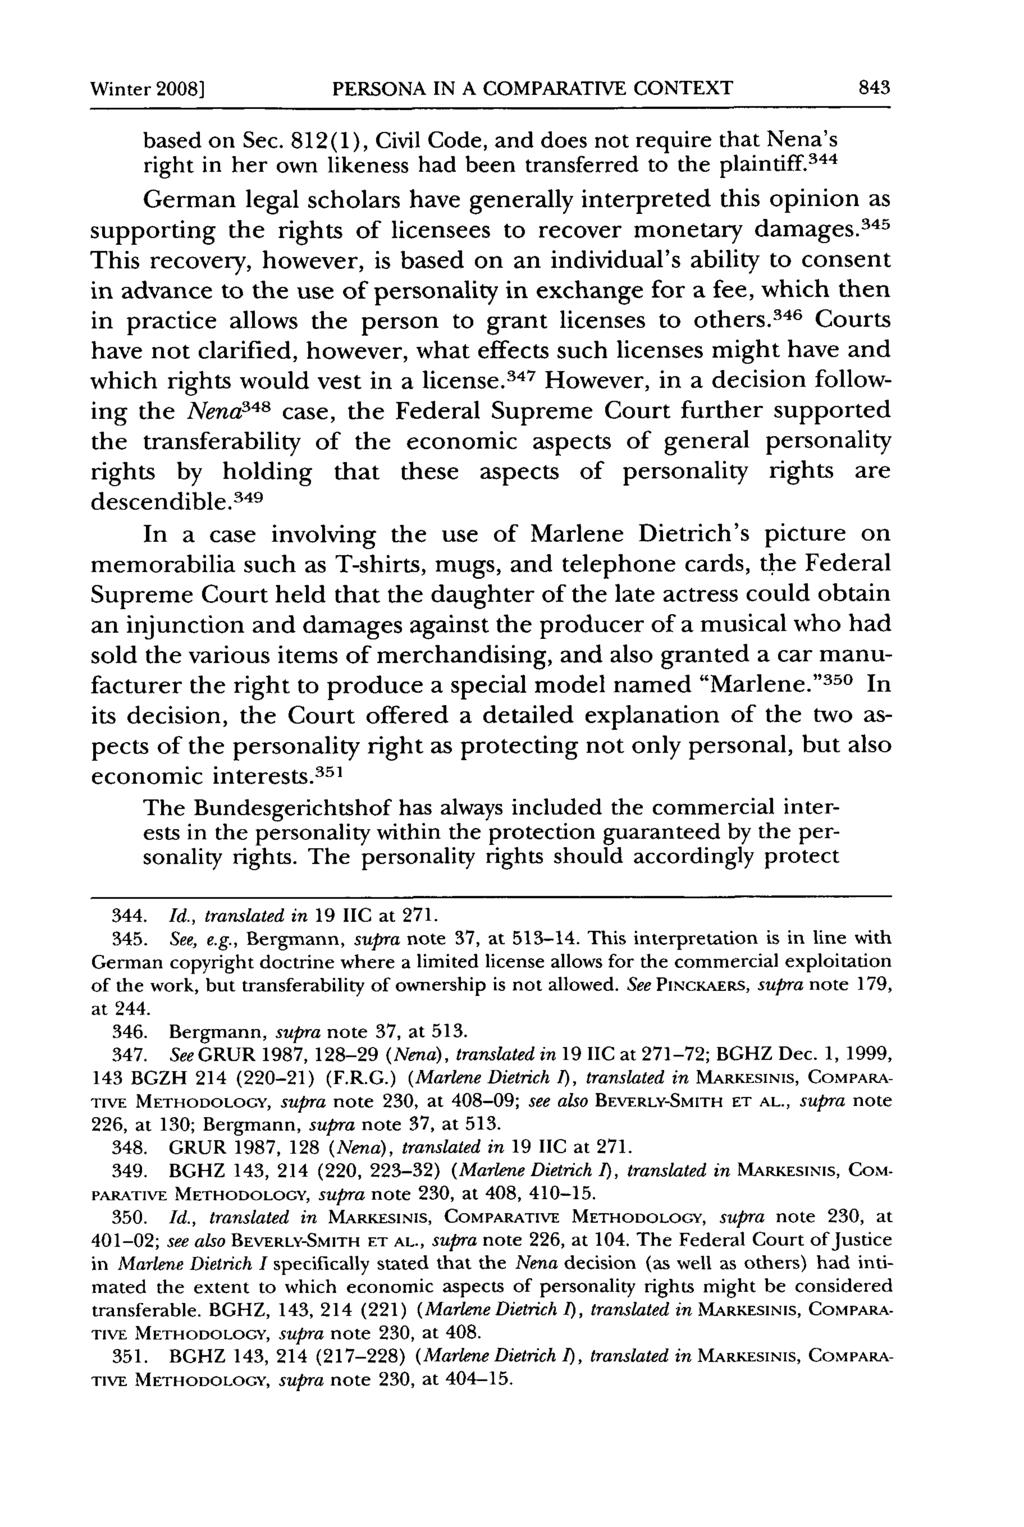 Winter 2008] PERSONA IN A COMPARATIVE CONTEXT based on Sec. 812(1), Civil Code, and does not require that Nena's right in her own likeness had been transferred to the plaintiff.